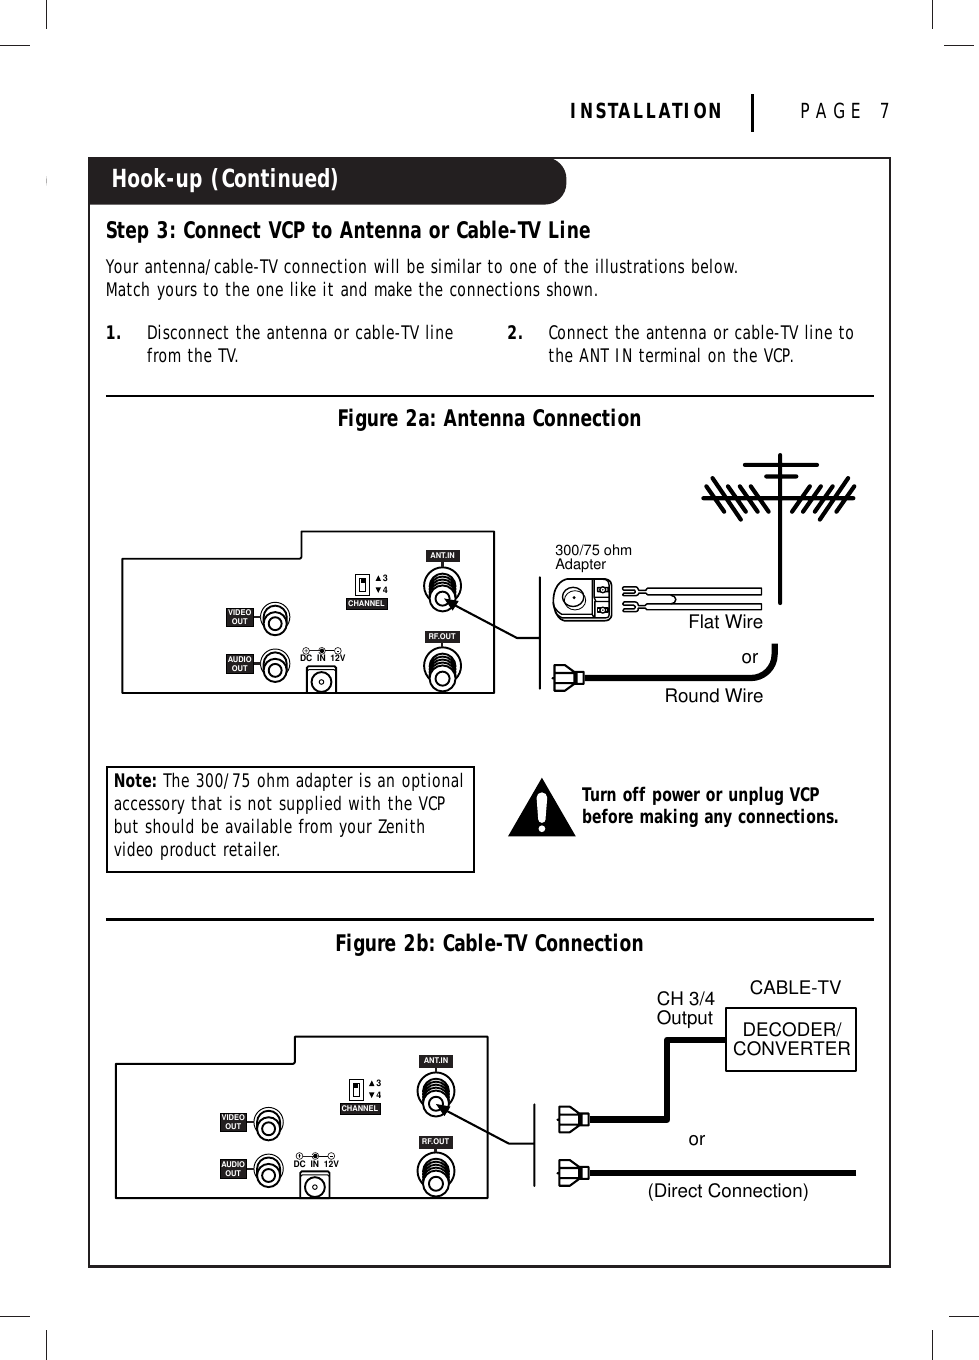 Hook-up (Continued)INSTALLATION PAGE 71. Disconnect the antenna or cable-TV linefrom the TV. 2. Connect the antenna or cable-TV line tothe ANT IN terminal on the VCP.Step 3: Connect VCP to Antenna or Cable-TV LineYour antenna/cable-TV connection will be similar to one of the illustrations below.Match yours to the one like it and make the connections shown.Note: The 300/75 ohm adapter is an optionalaccessory that is not supplied with the VCPbut should be available from your Zenithvideo product retailer. Figure 2a: Antenna Connection3DC  IN  12V4CHANNELRF.OUTANT.INVIDEOOUTAUDIOOUTFlat Wire300/75 ohmAdapterRound Wireor3DC  IN  12V4CHANNELRF.OUTANT.INVIDEOOUTAUDIOOUTCH 3/4Output DECODER/CONVERTER(Direct Connection)orCABLE-TVTurn off power or unplug VCPbefore making any connections.Figure 2b: Cable-TV Connection